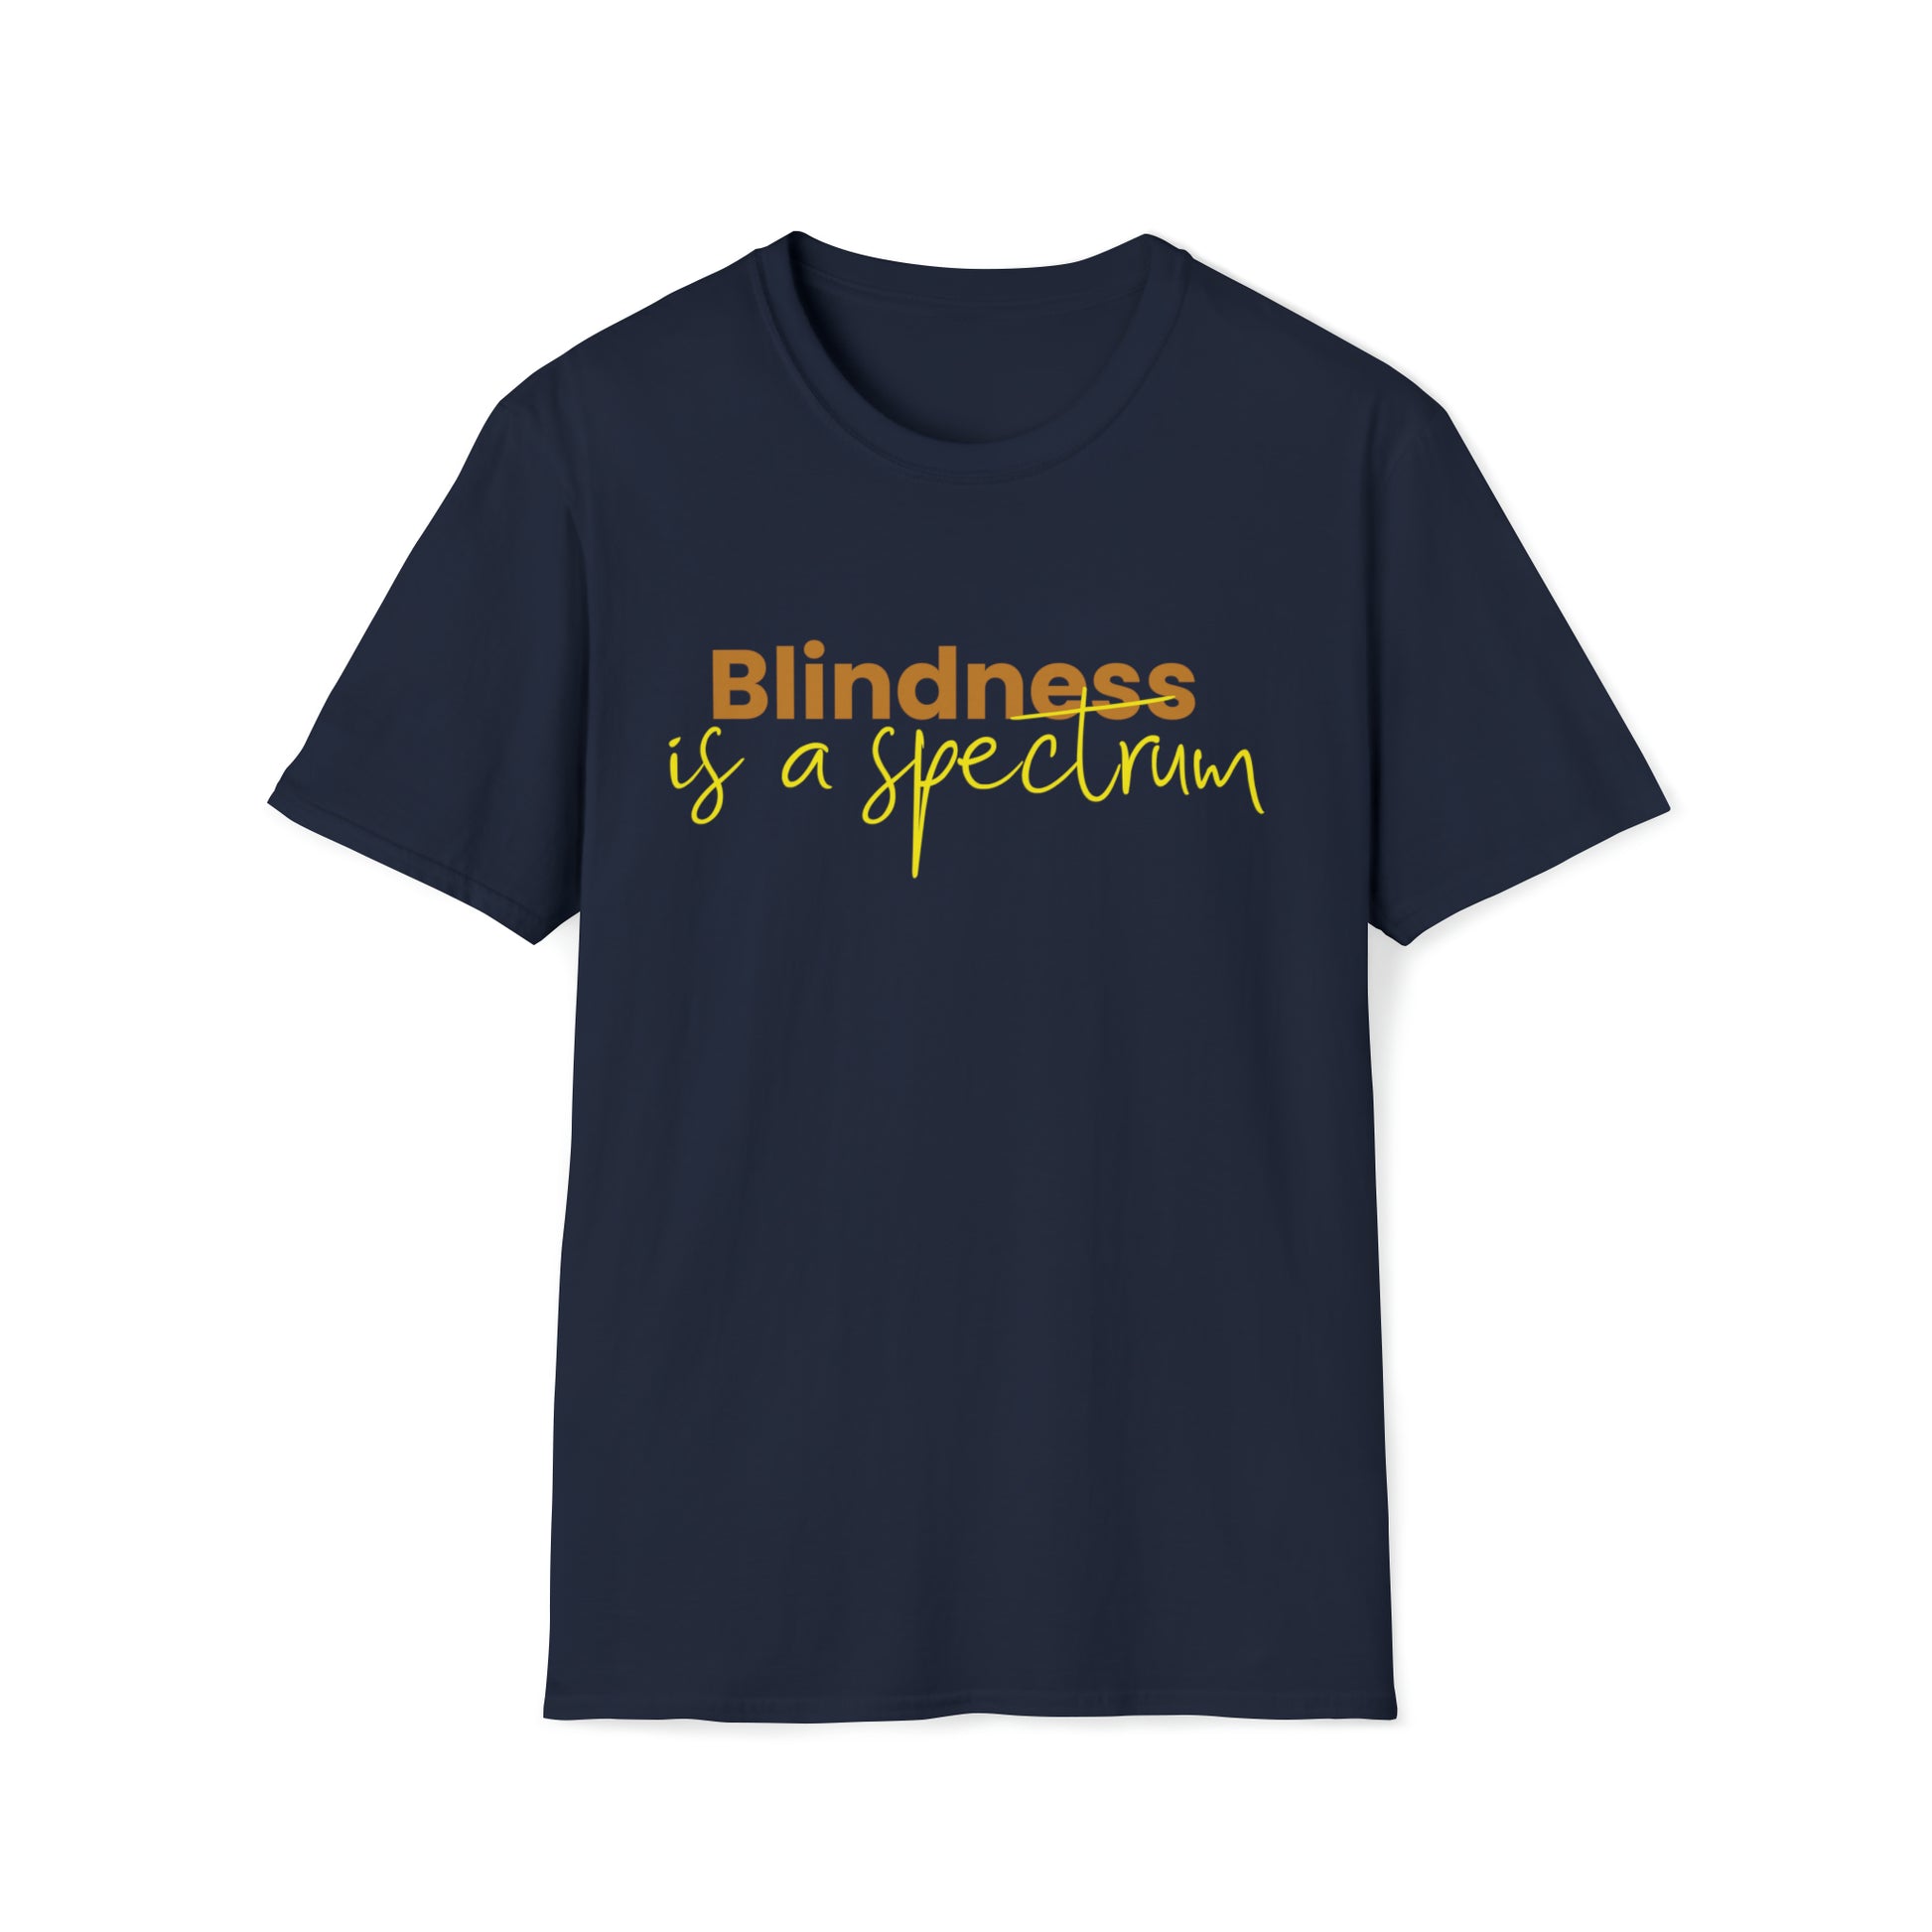 Blindness is a spectrum - Unisex Softstyle T-Shirt